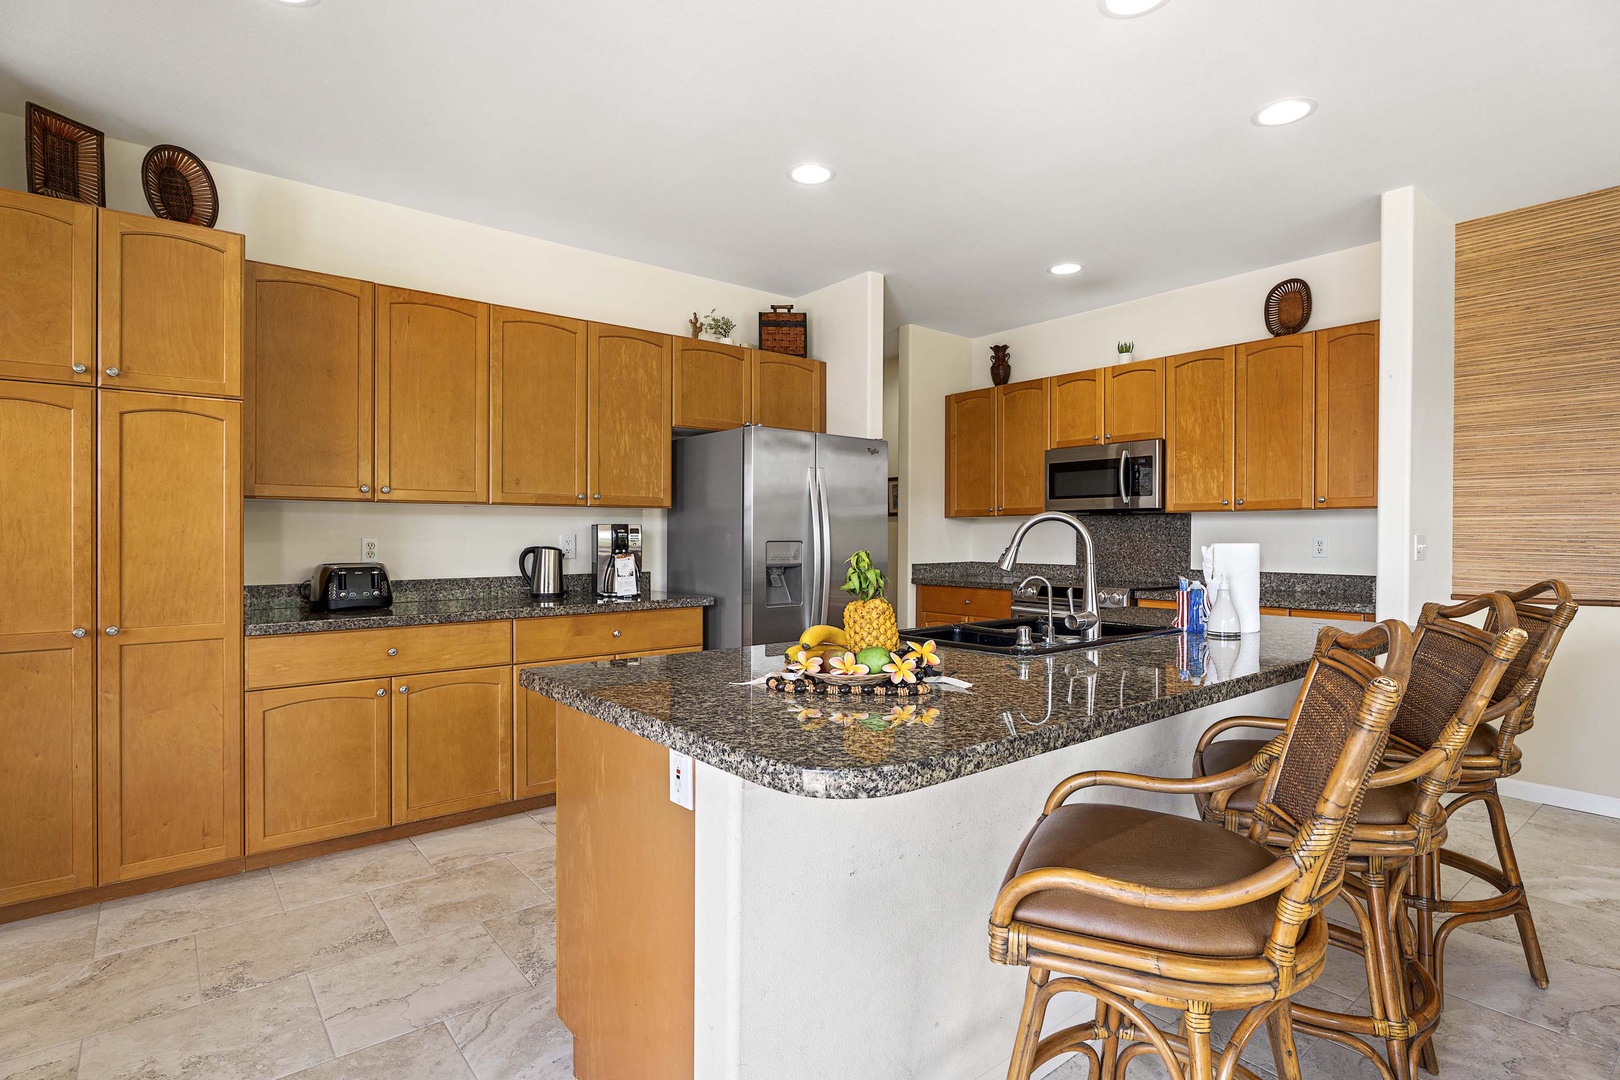 Kailua Kona Vacation Rentals, Kahakai Estates Hale - Gather, dine, and share moments at our kitchen's central stage.